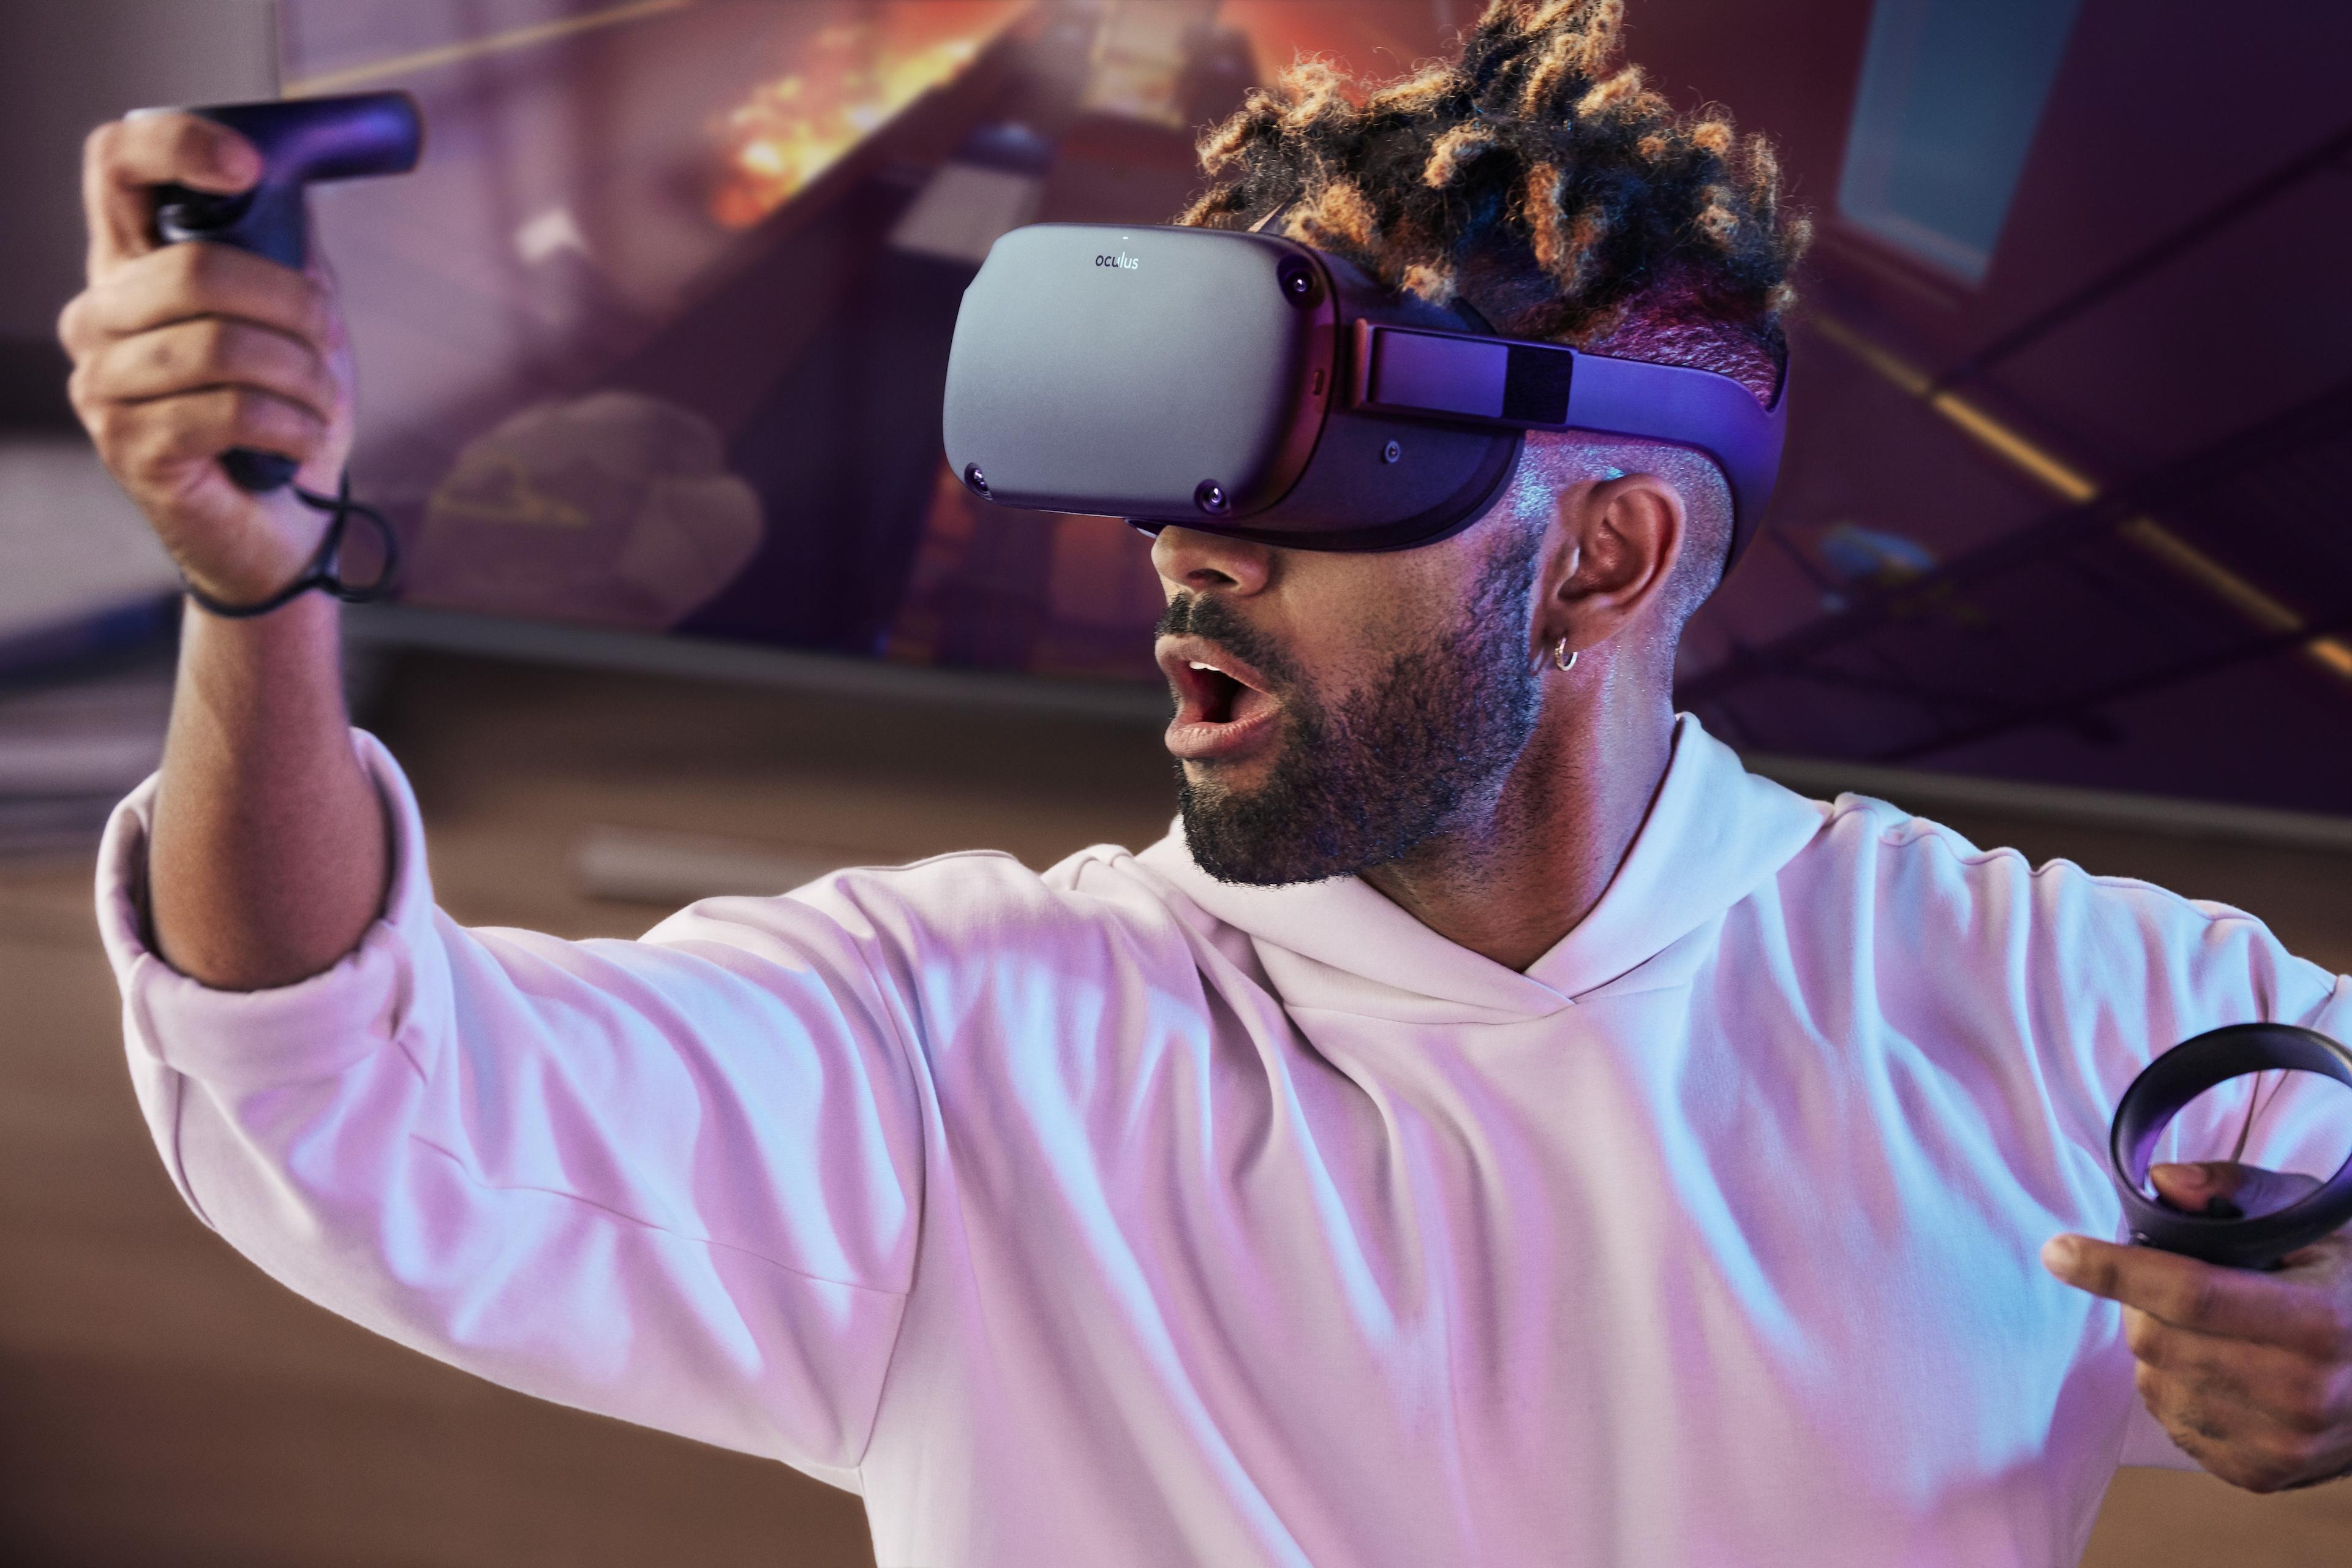 Oculus Quest Stand Alone VR Headset Coming Spring 2019 For $399